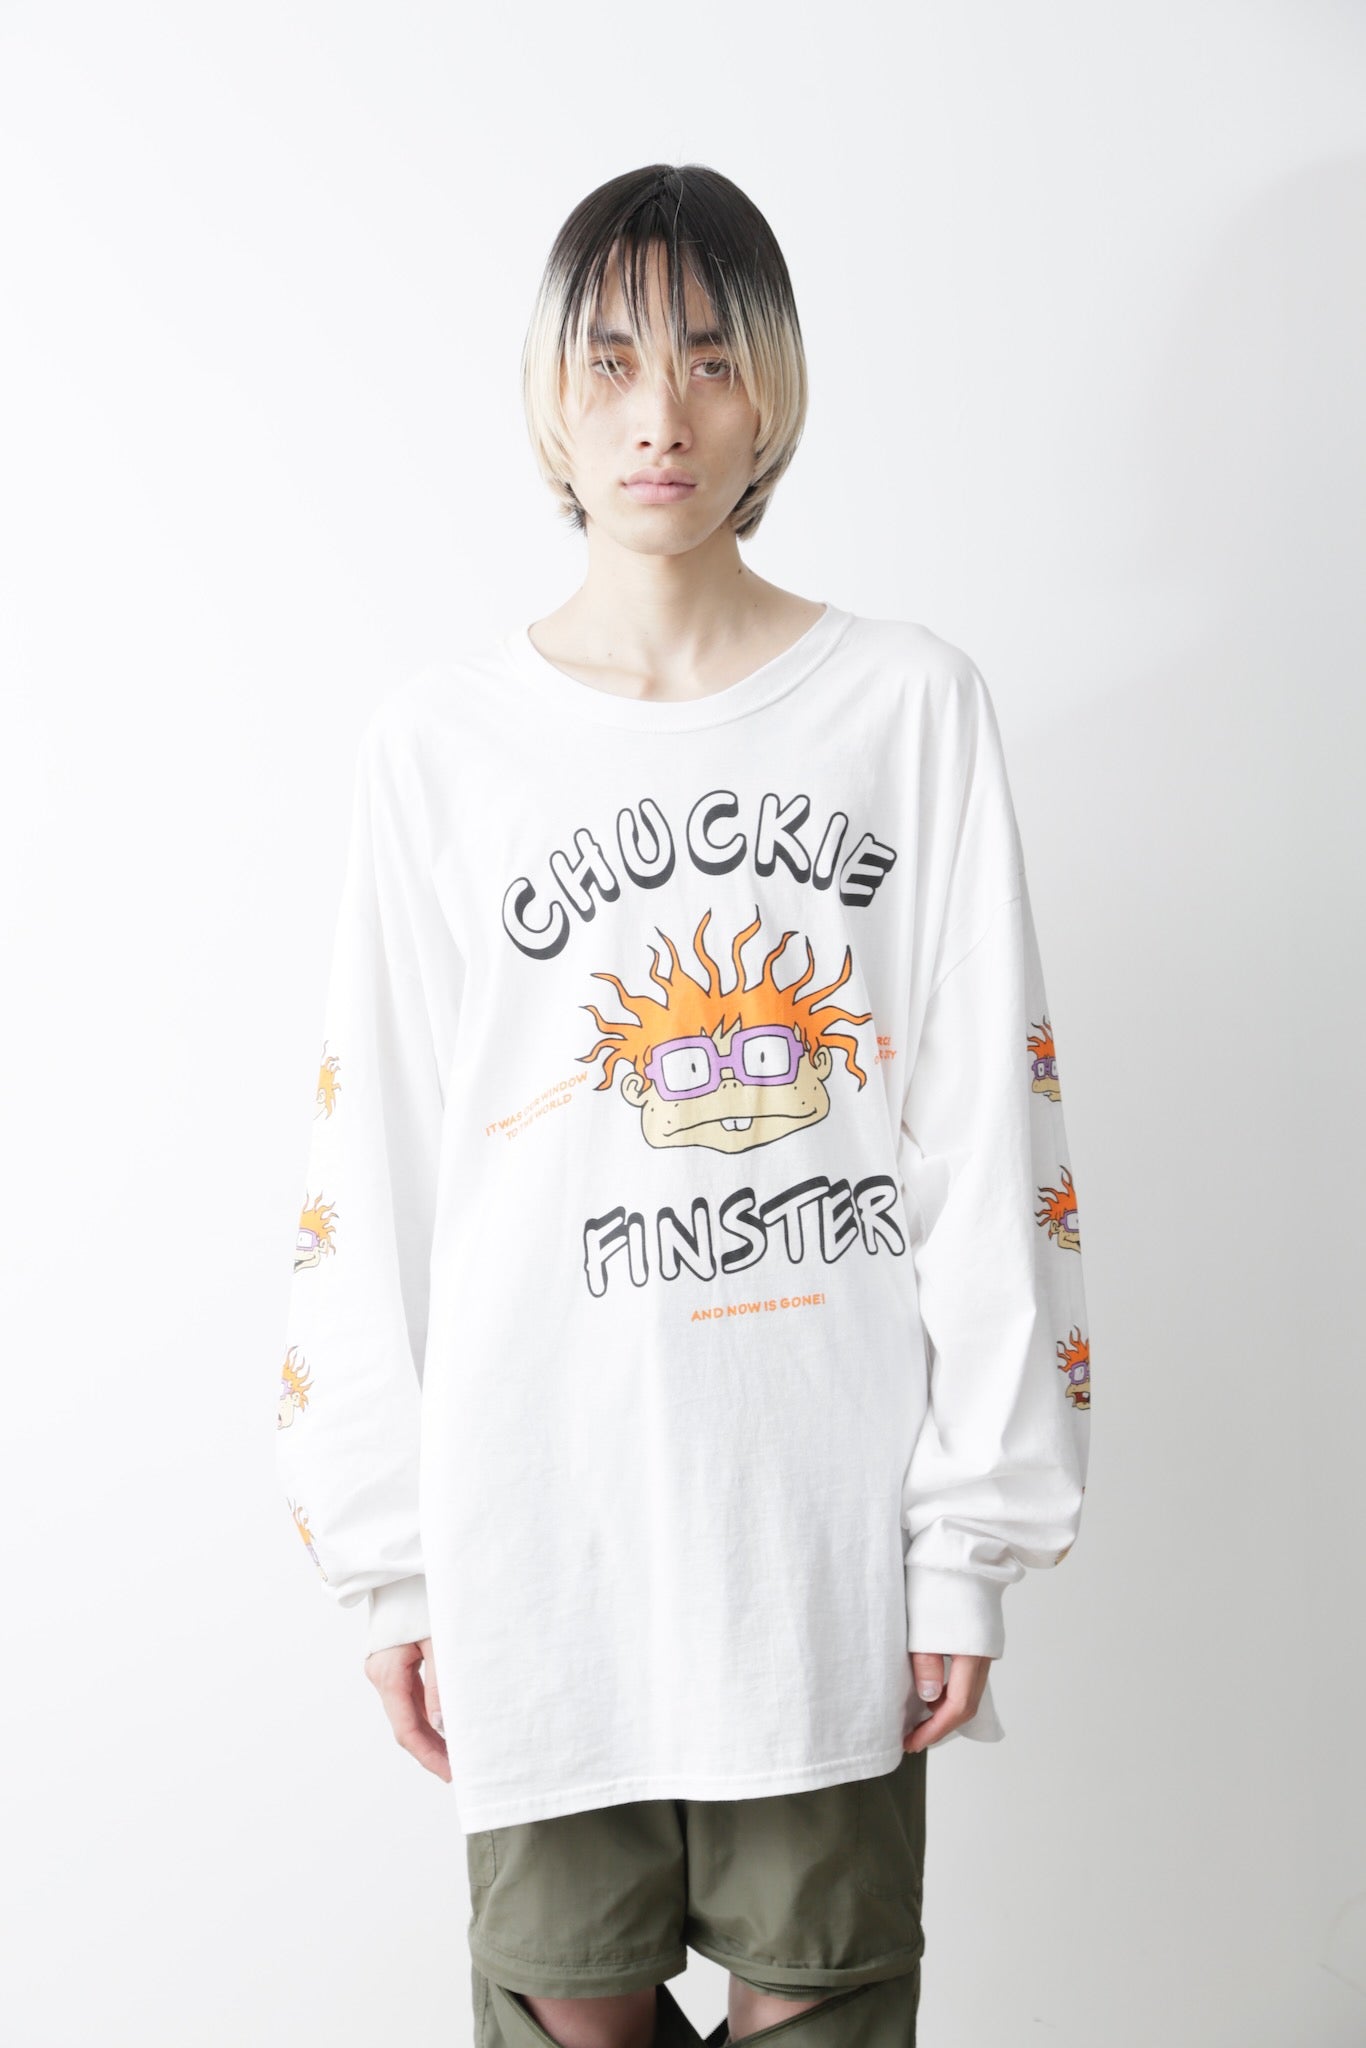 CHUCKIE FINSTER OVER SIZE LONG SLEEVE T-SHIRT